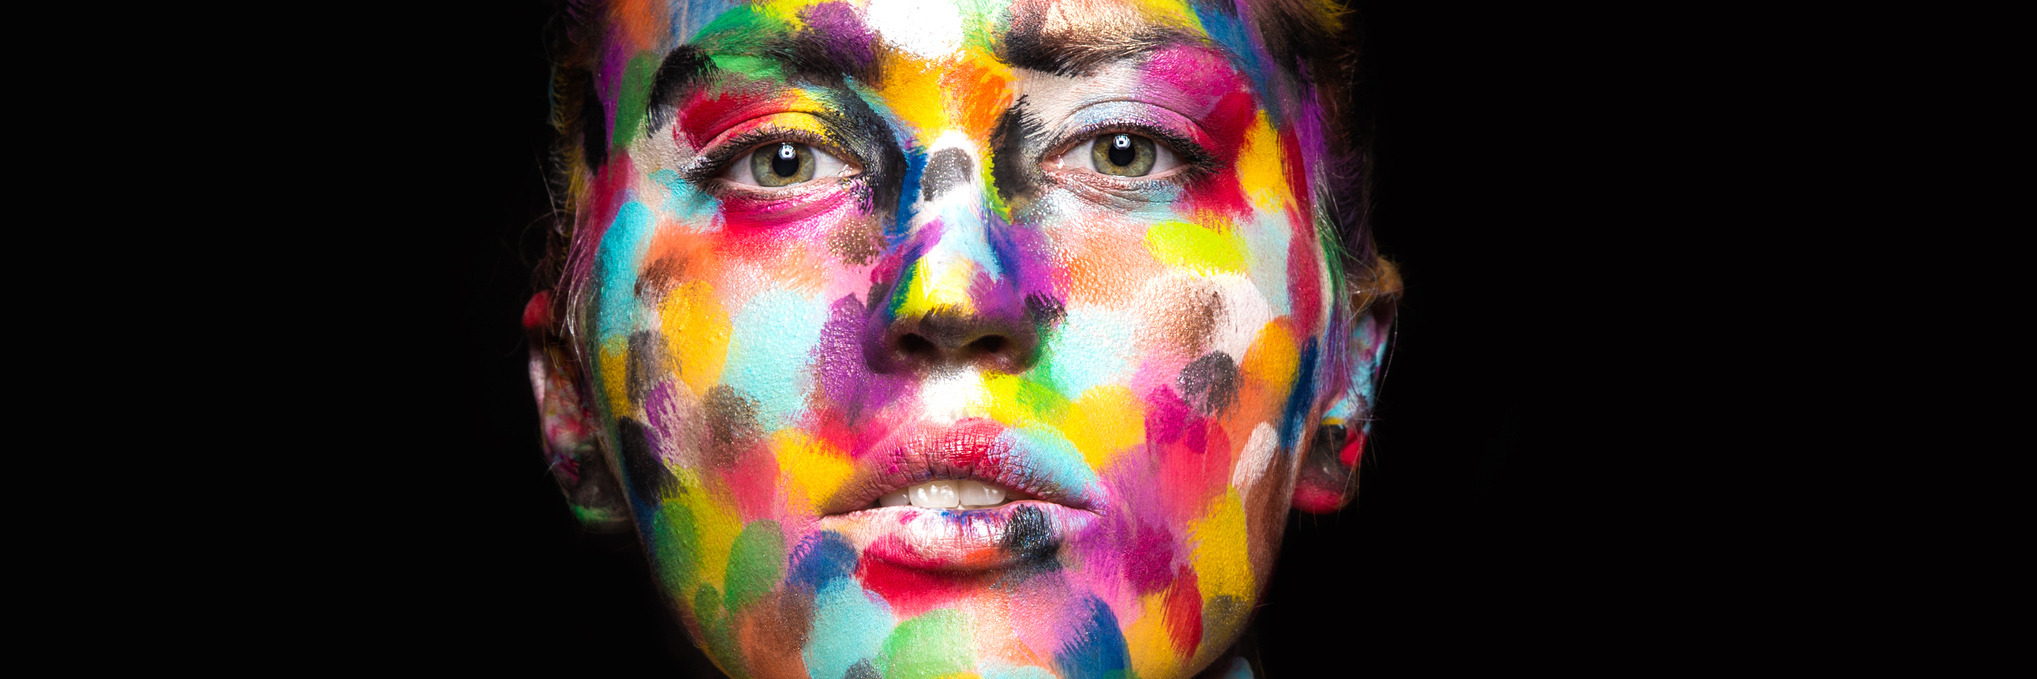 woman with her face painted in multi-colored spots